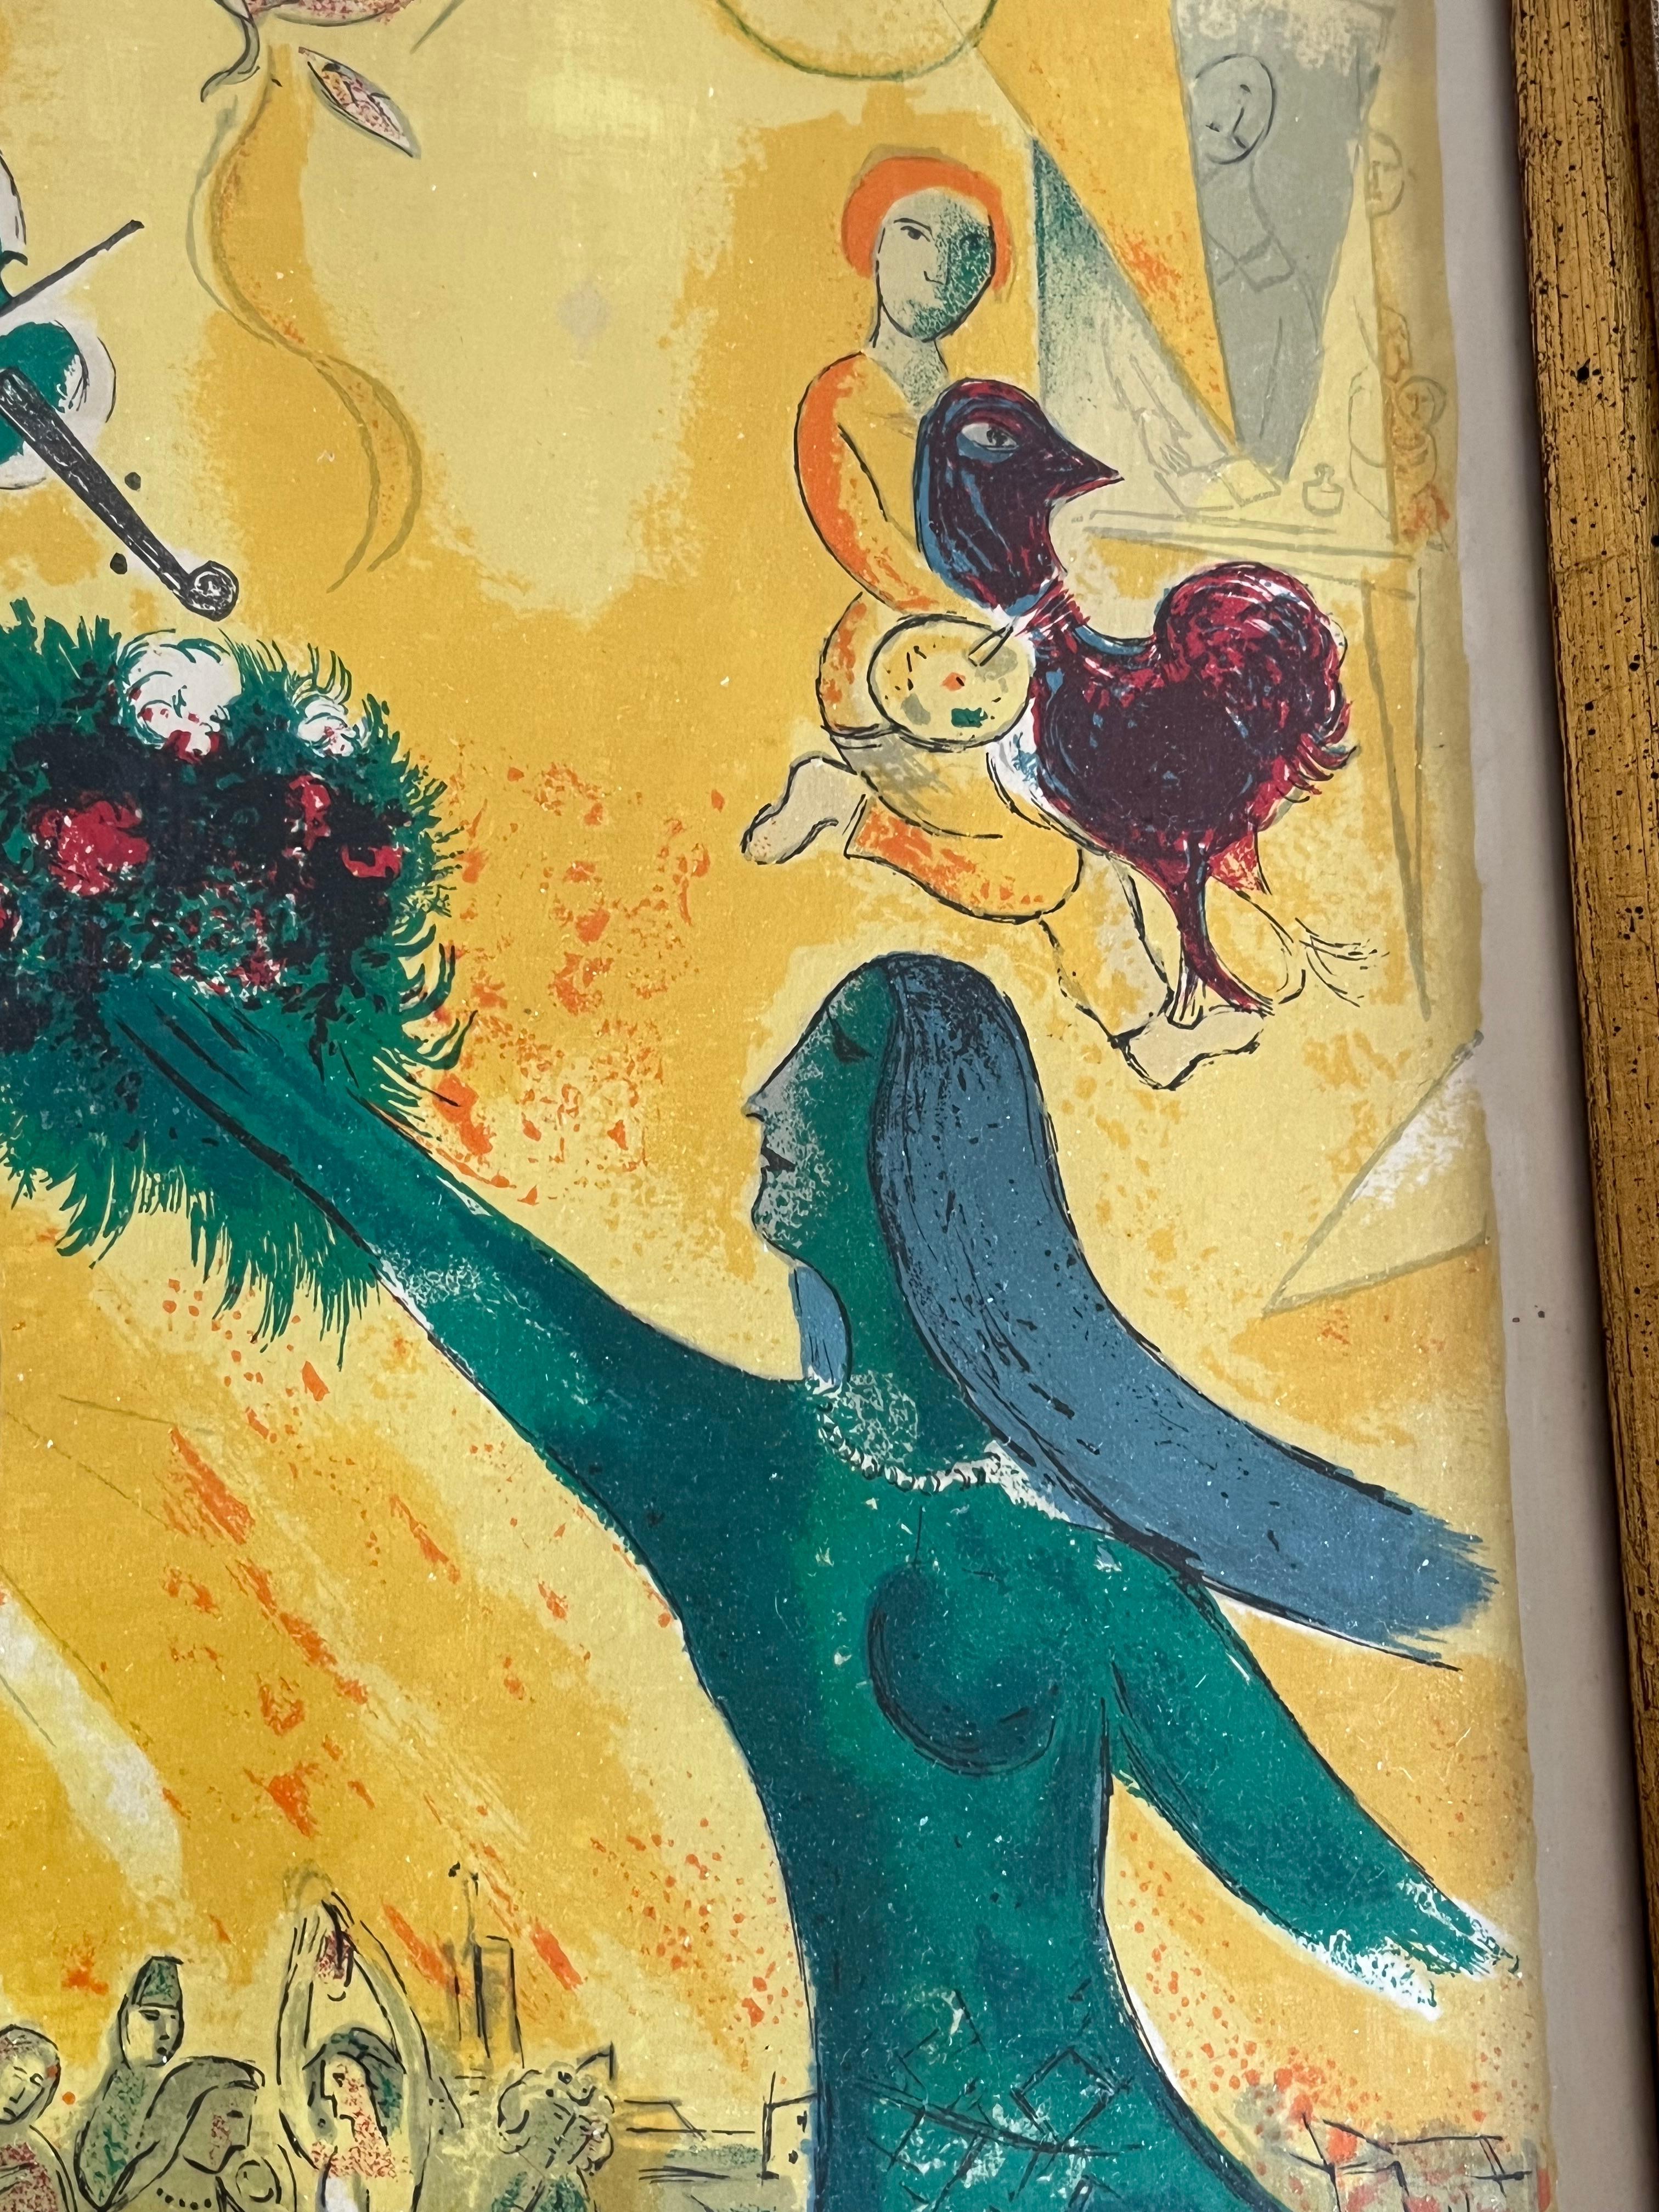 20th Century Marc Chagall “The Dance” 1950 Litho For Sale